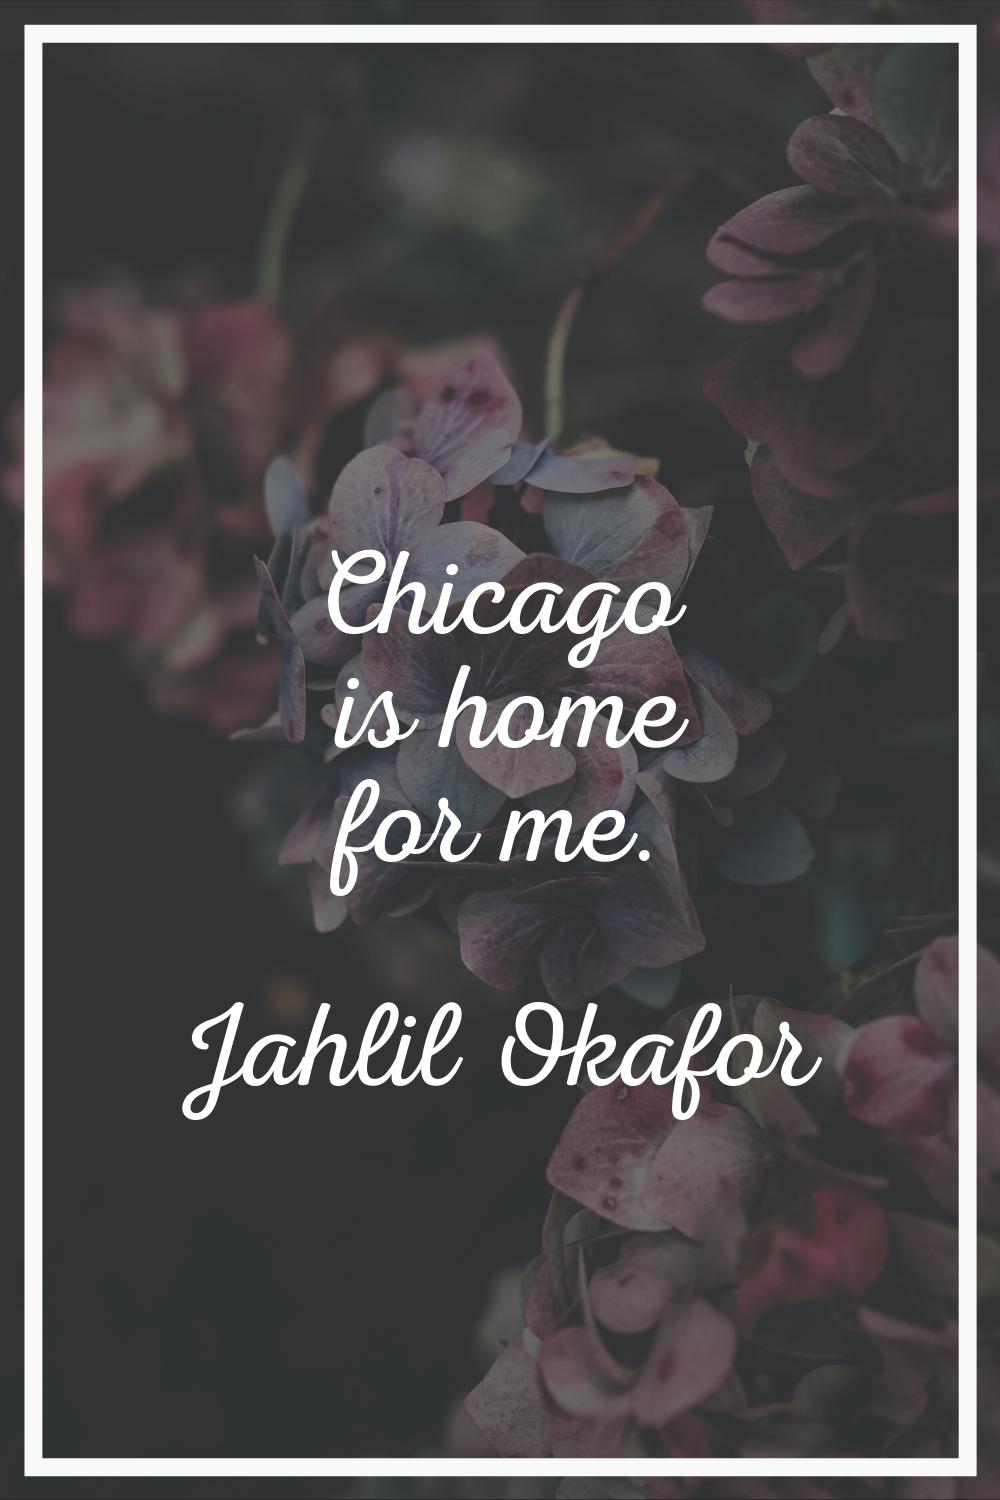 Chicago is home for me.